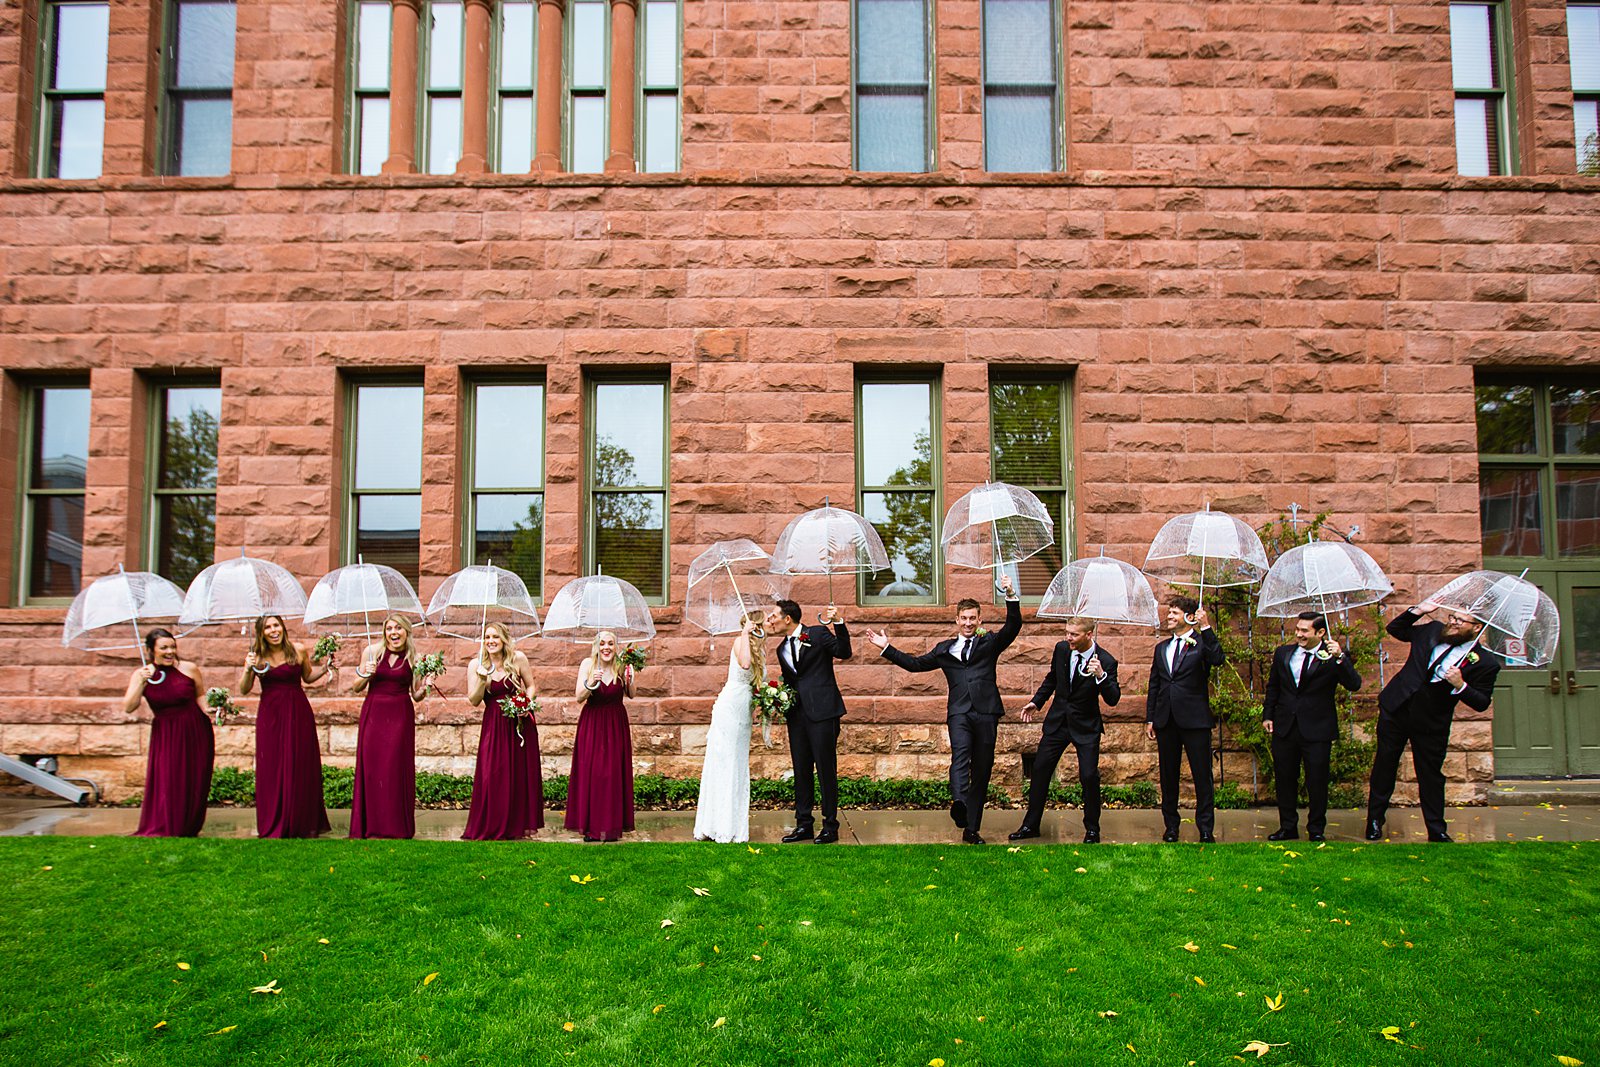 Bridal party having fun together at downtown Flagstaff weding by Arizona wedding photographer PMA Photography.